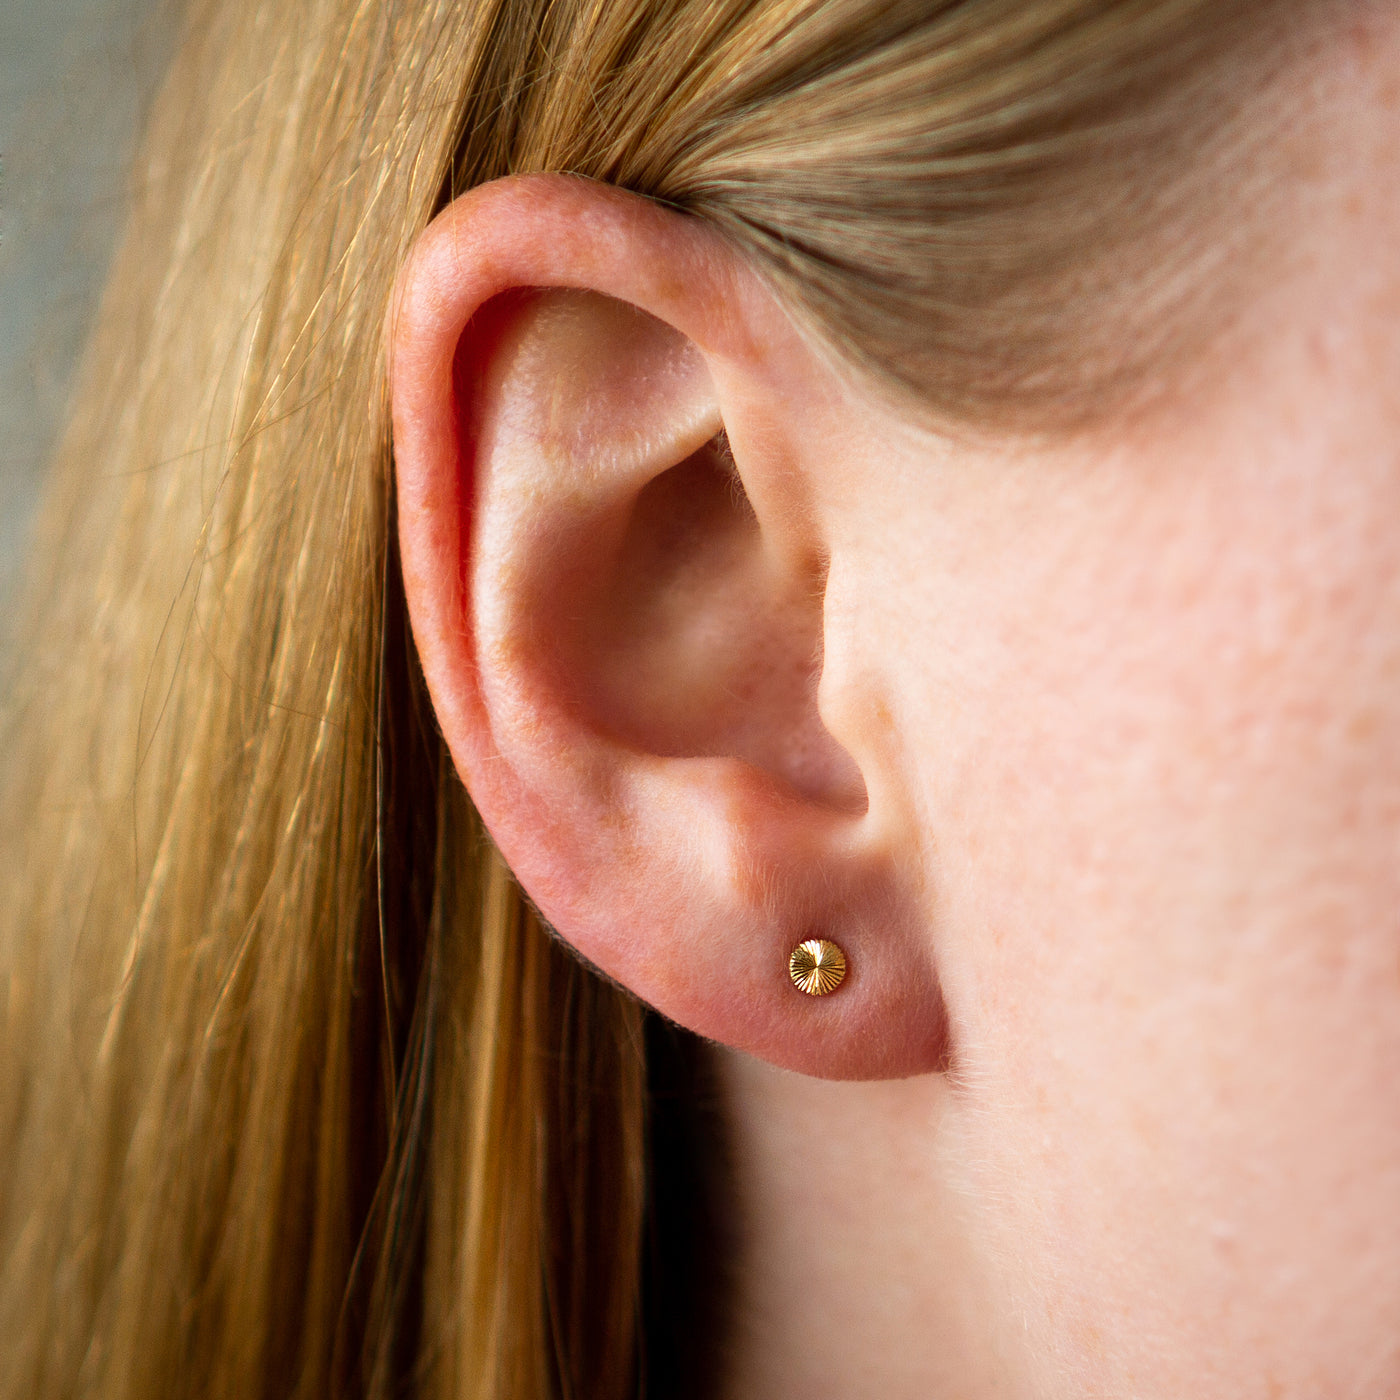 Tiny engraved gold stud earring by Corey Egan on an ear